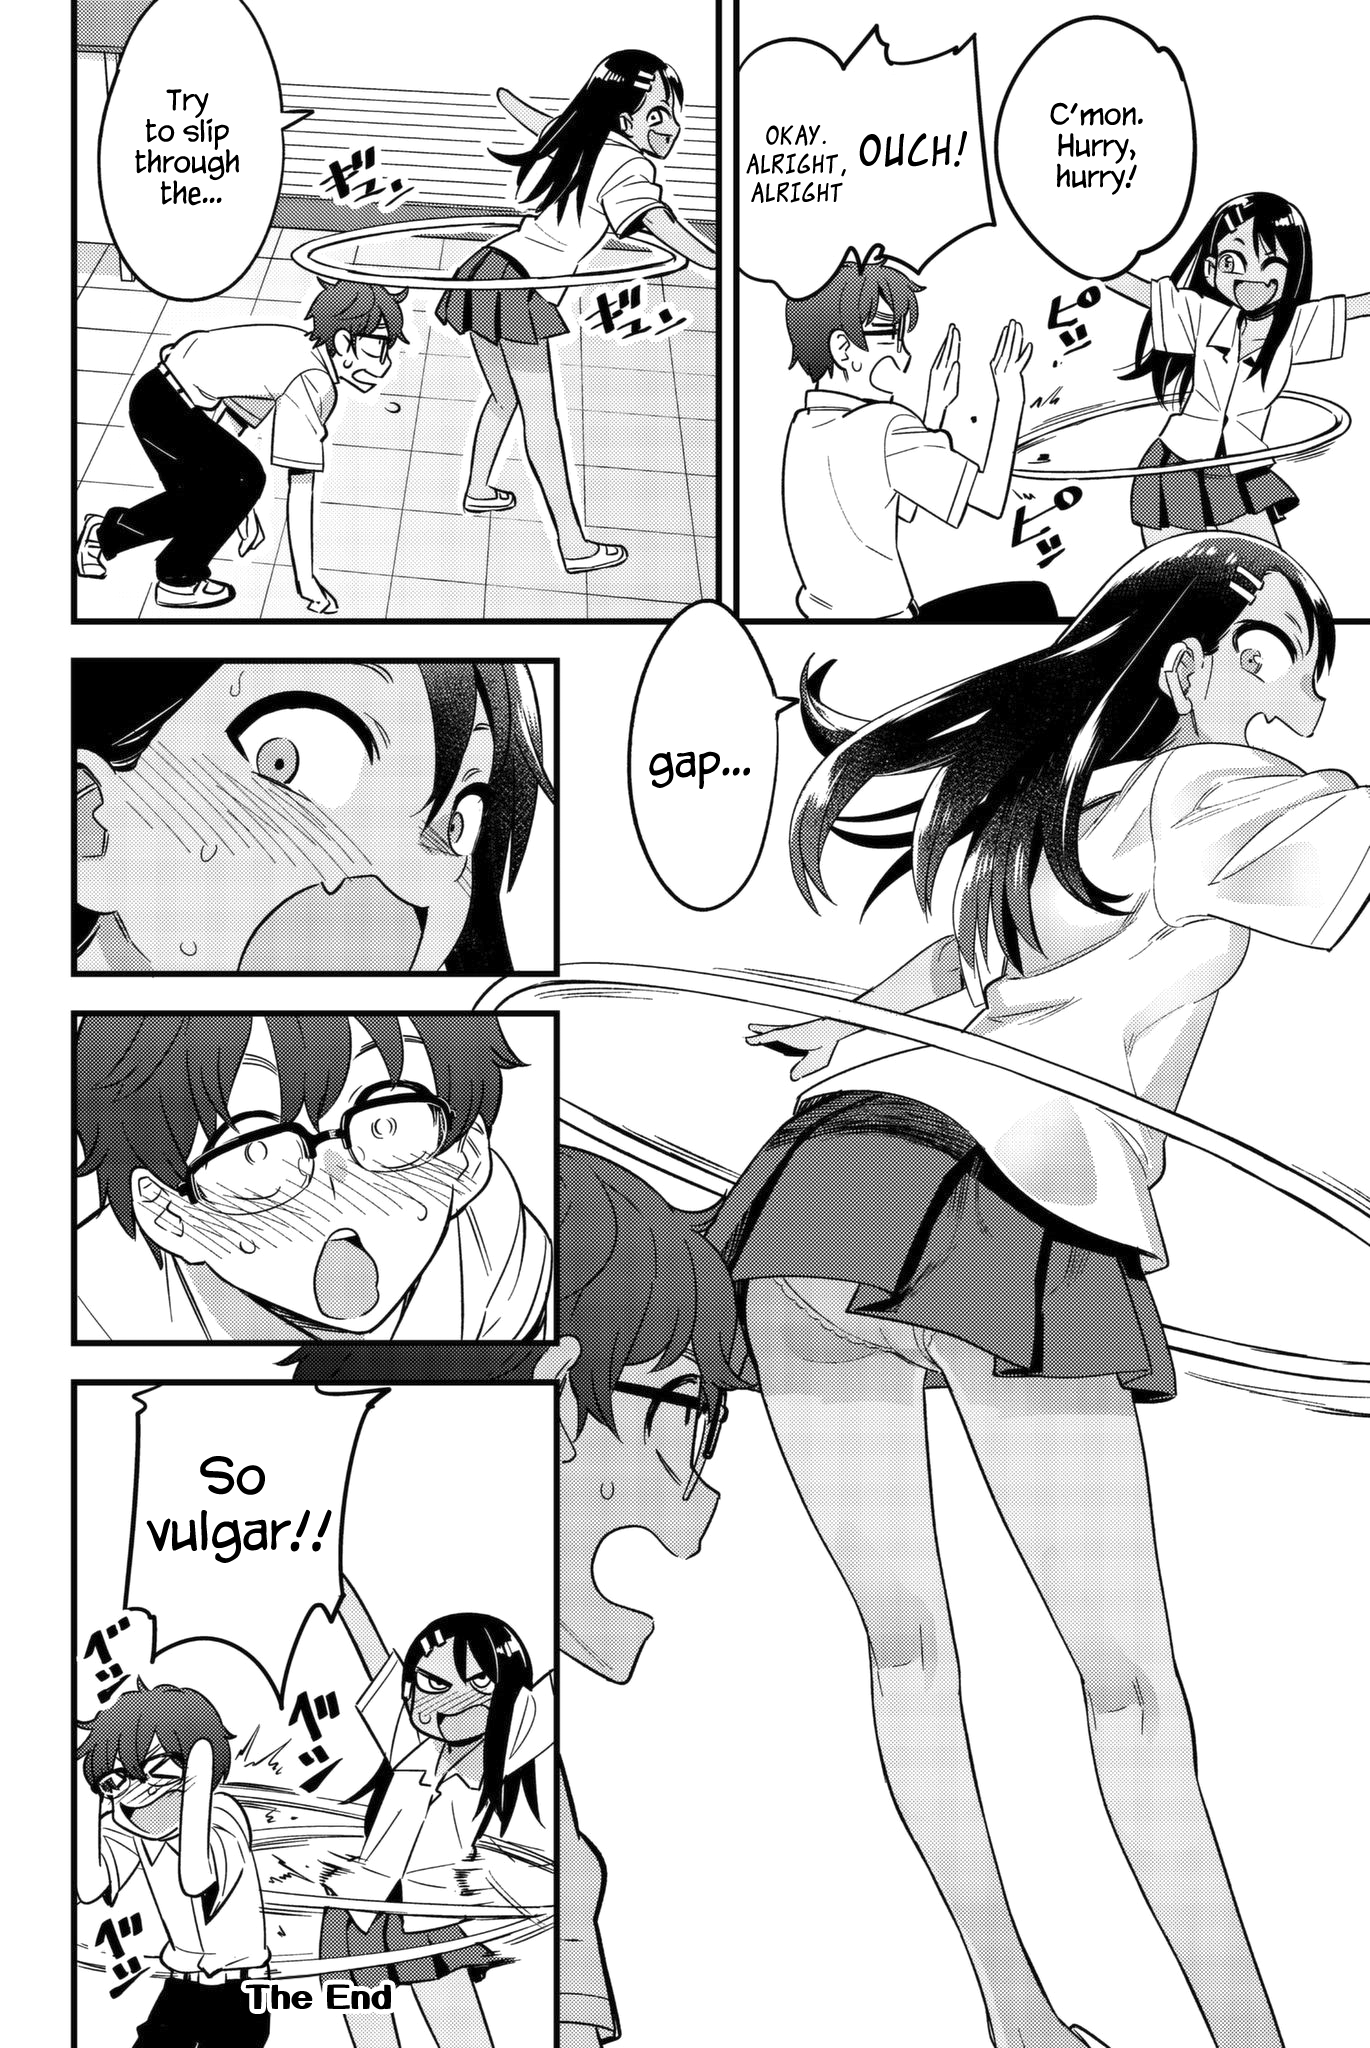 Ijiranaide, Nagatoro-San Vol.3 Chapter 23.1: Omake 1: How's It Going, Senpai!! Check Out My Hula Hoop!! - Picture 2